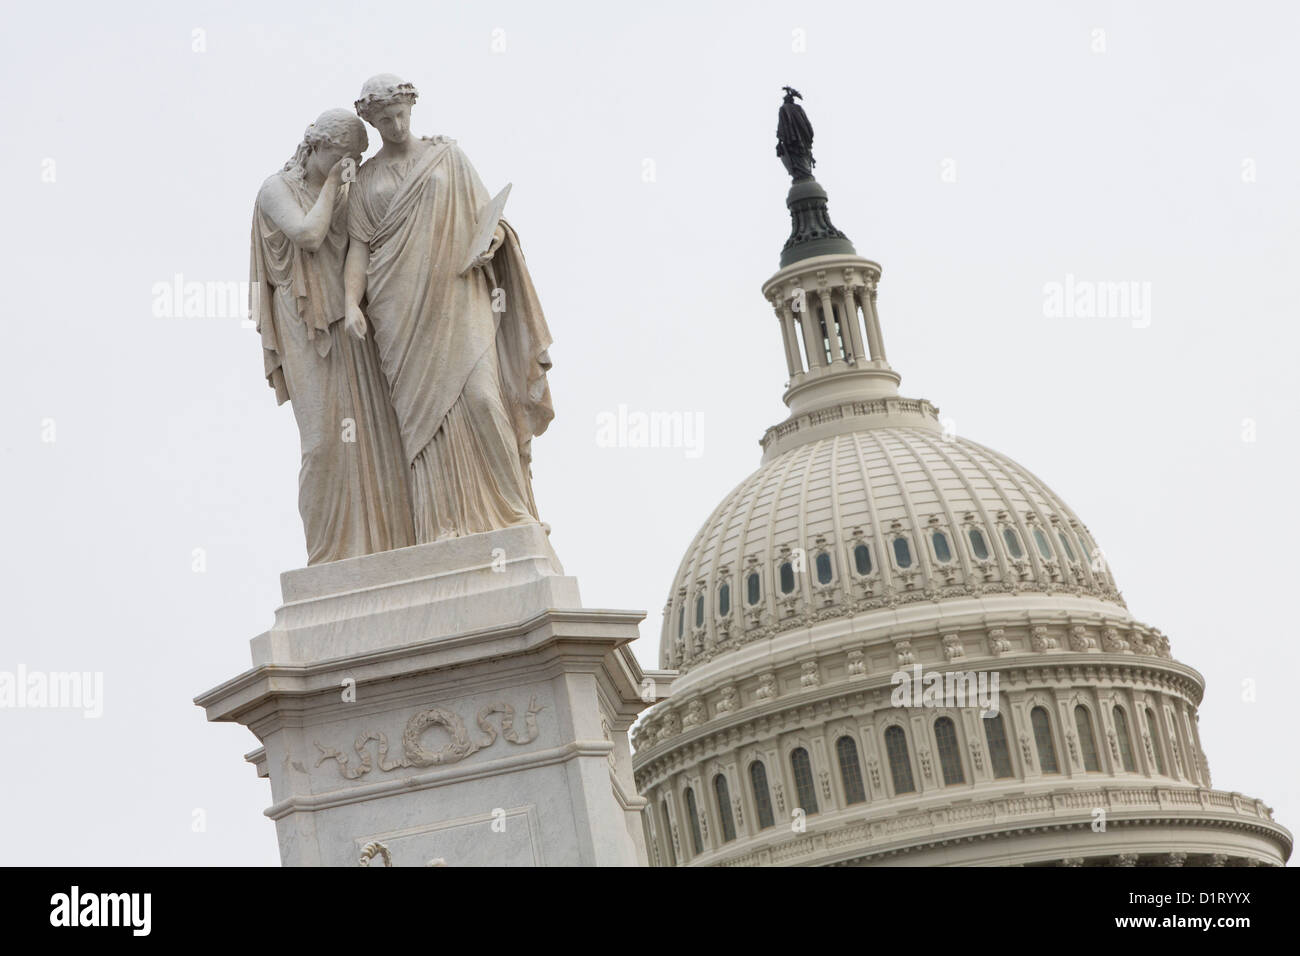 Views of the United States Capitol building, home of the United States Congress.  Stock Photo